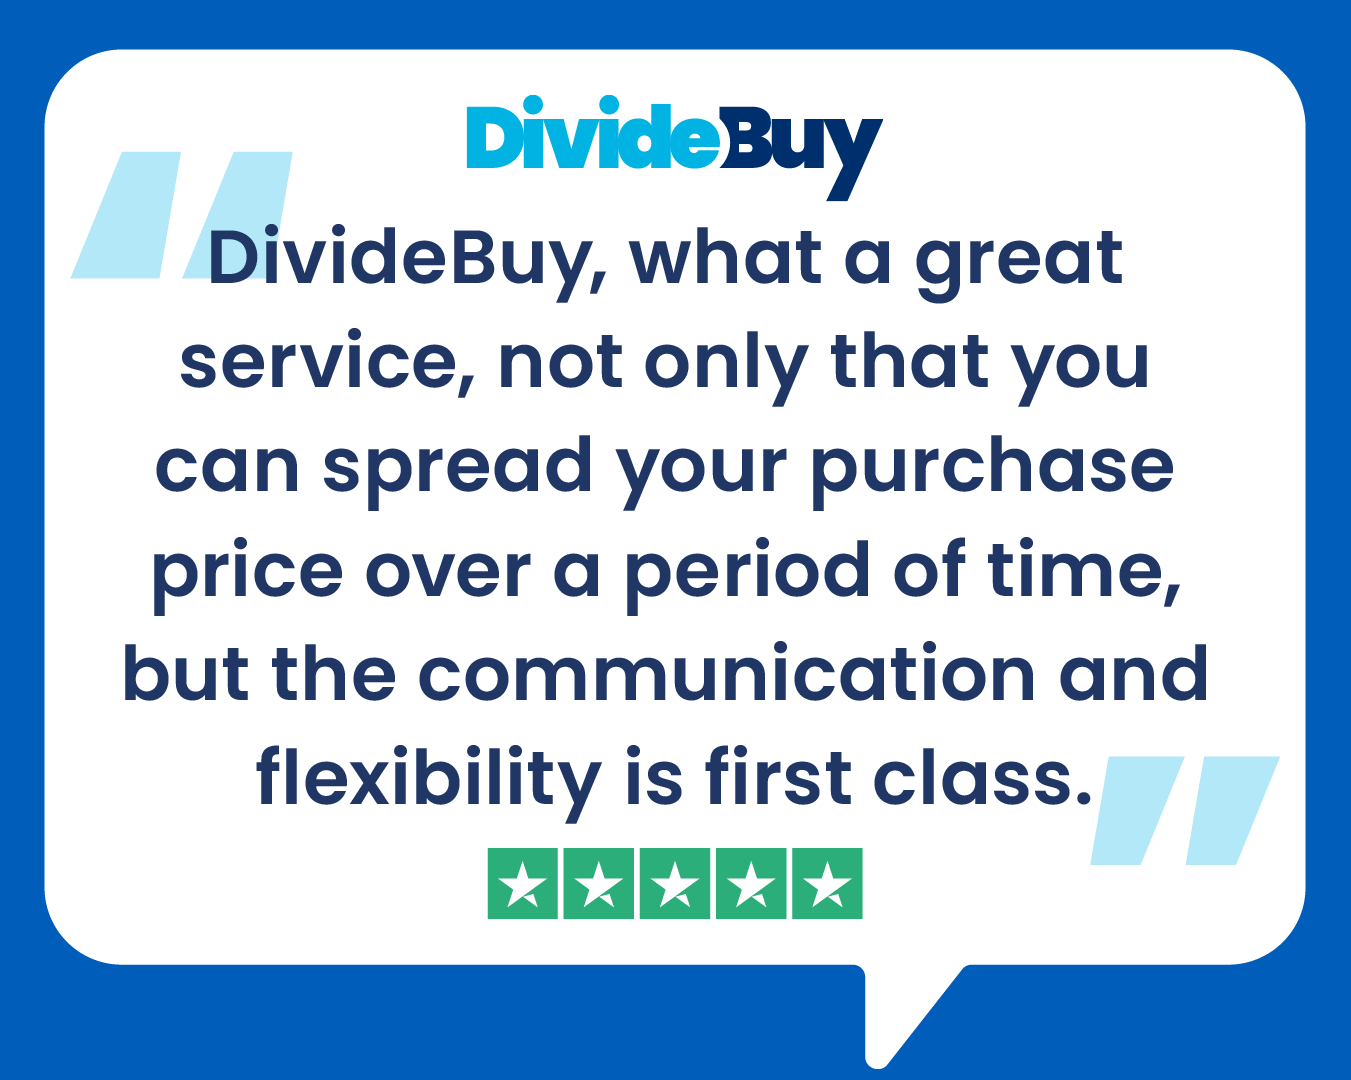 Review from a customer reasding DivideBuy, what a great service, not only that you can spread your purchase price over a period of time, but the communication and flexibility is first class